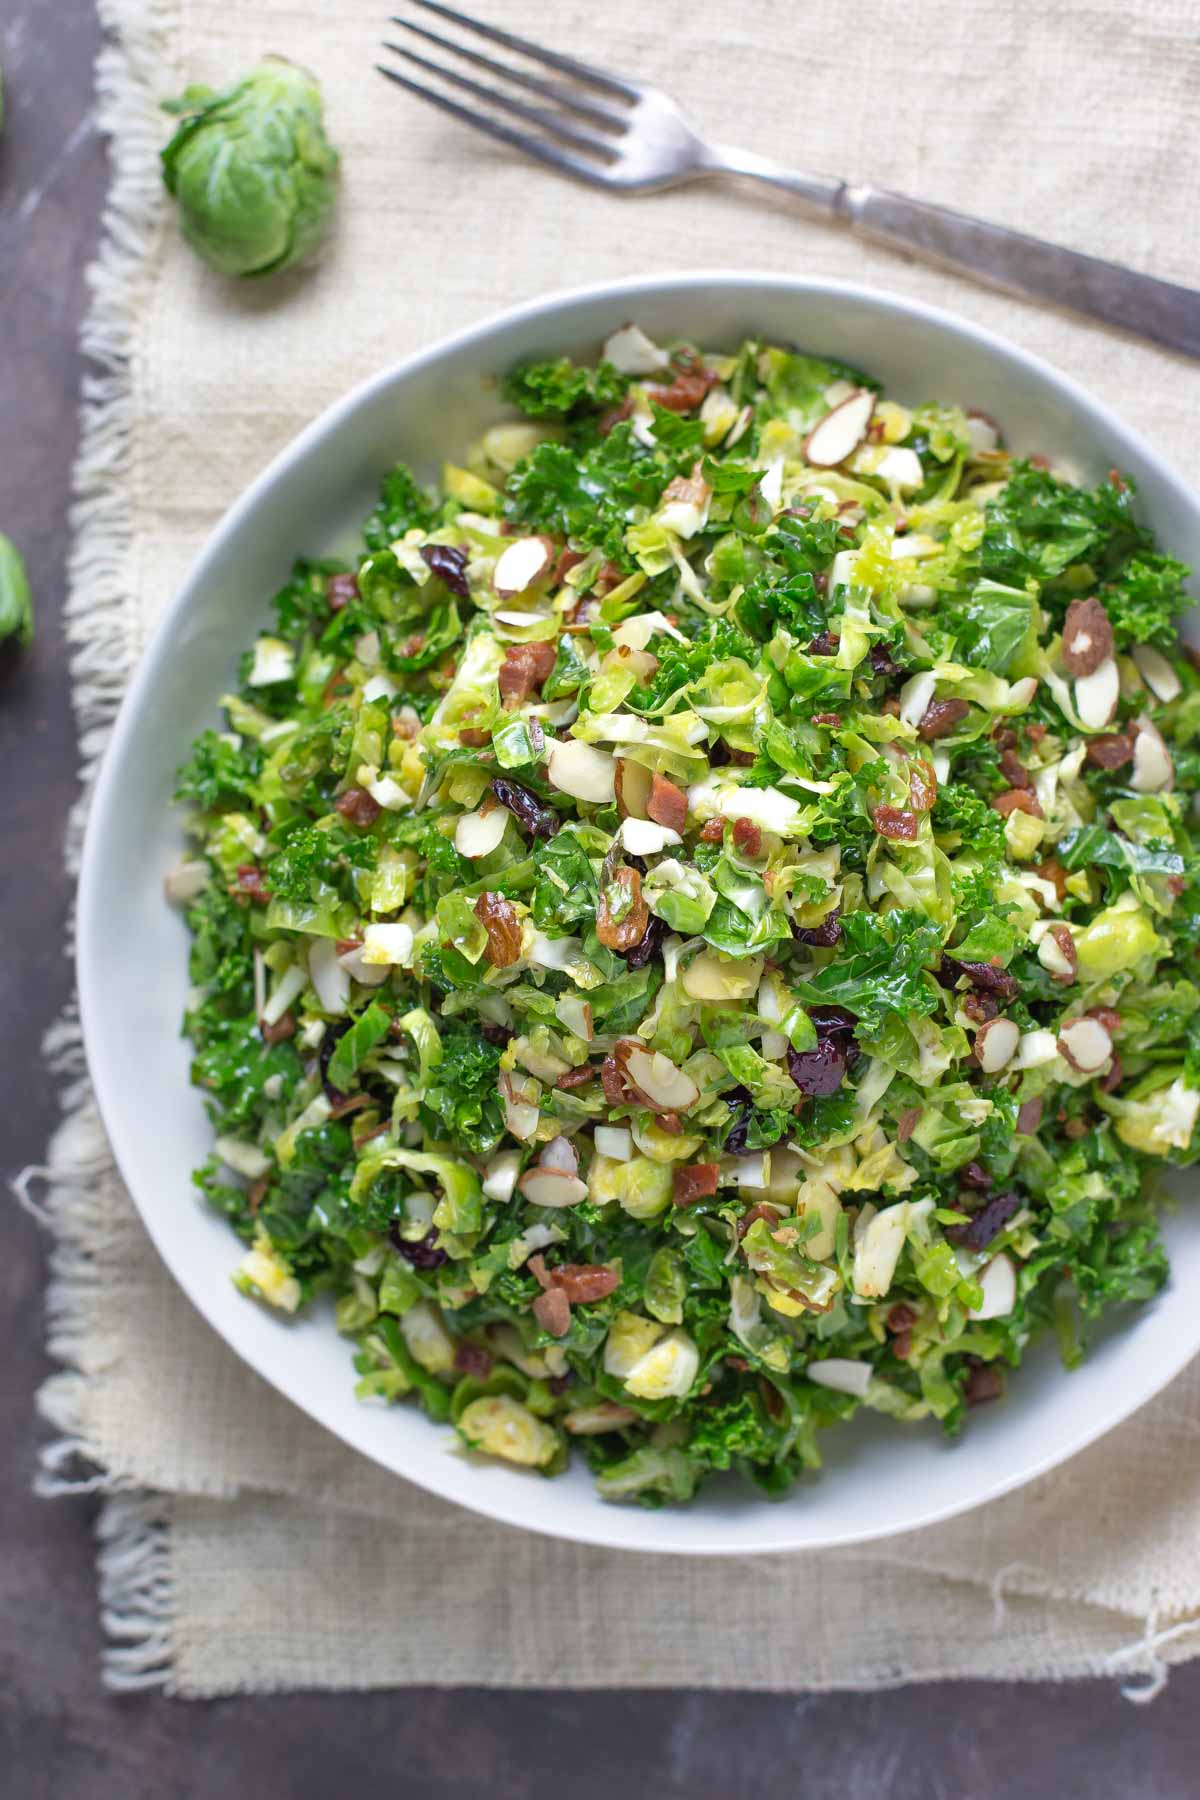 Brussels Sprouts and Kale Salad | Dairy Free Salad, winter salad, Brussels sprouts salad #salad #brusselssprouts #dairyfree | @simplywhisked